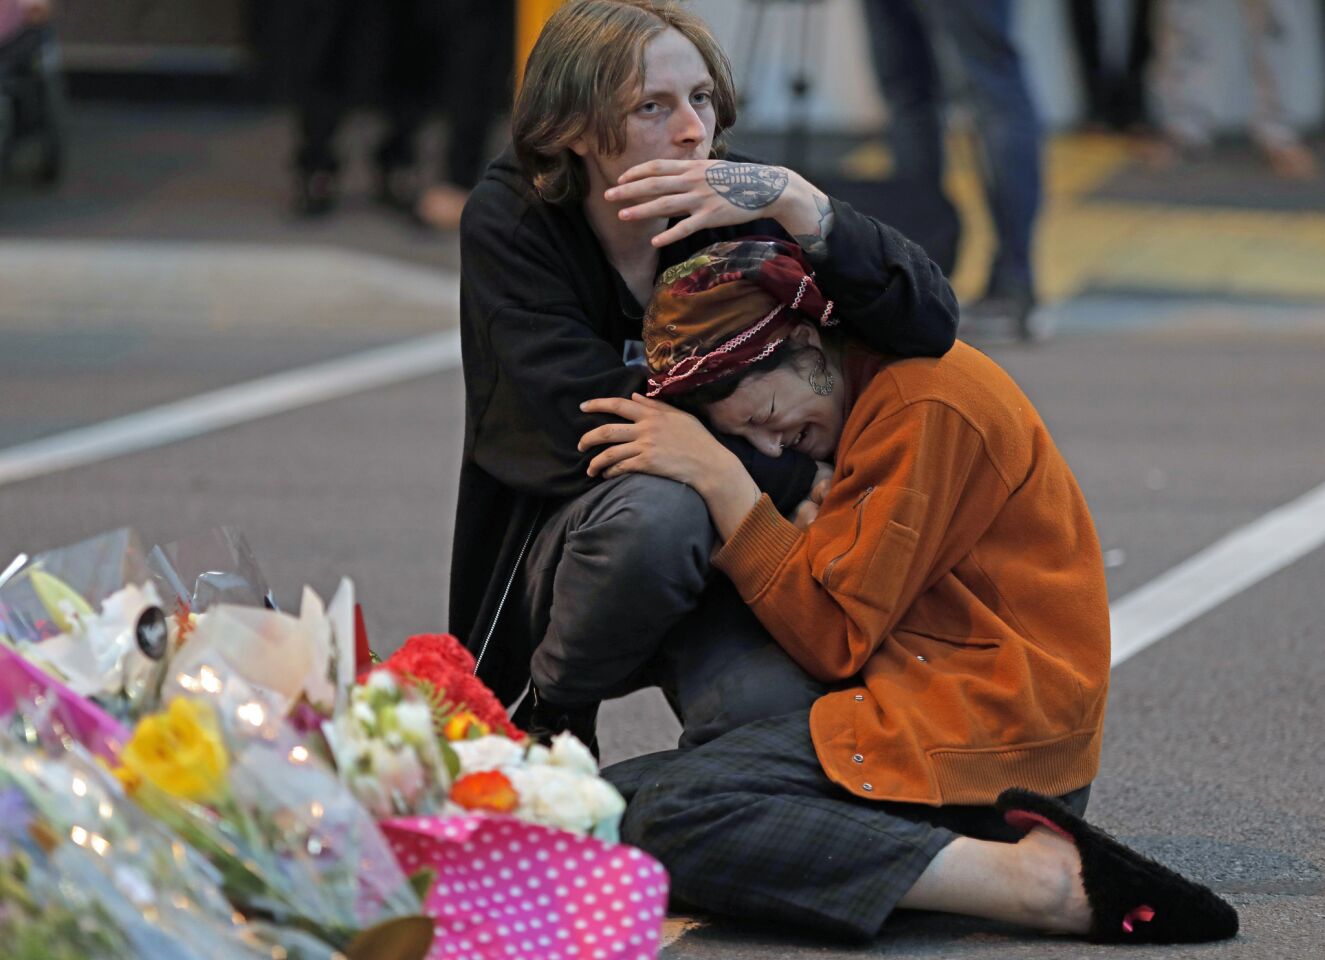 Mourners share their grief at a memorial near the Al Noor Mosque in Christchurch, New Zealand.